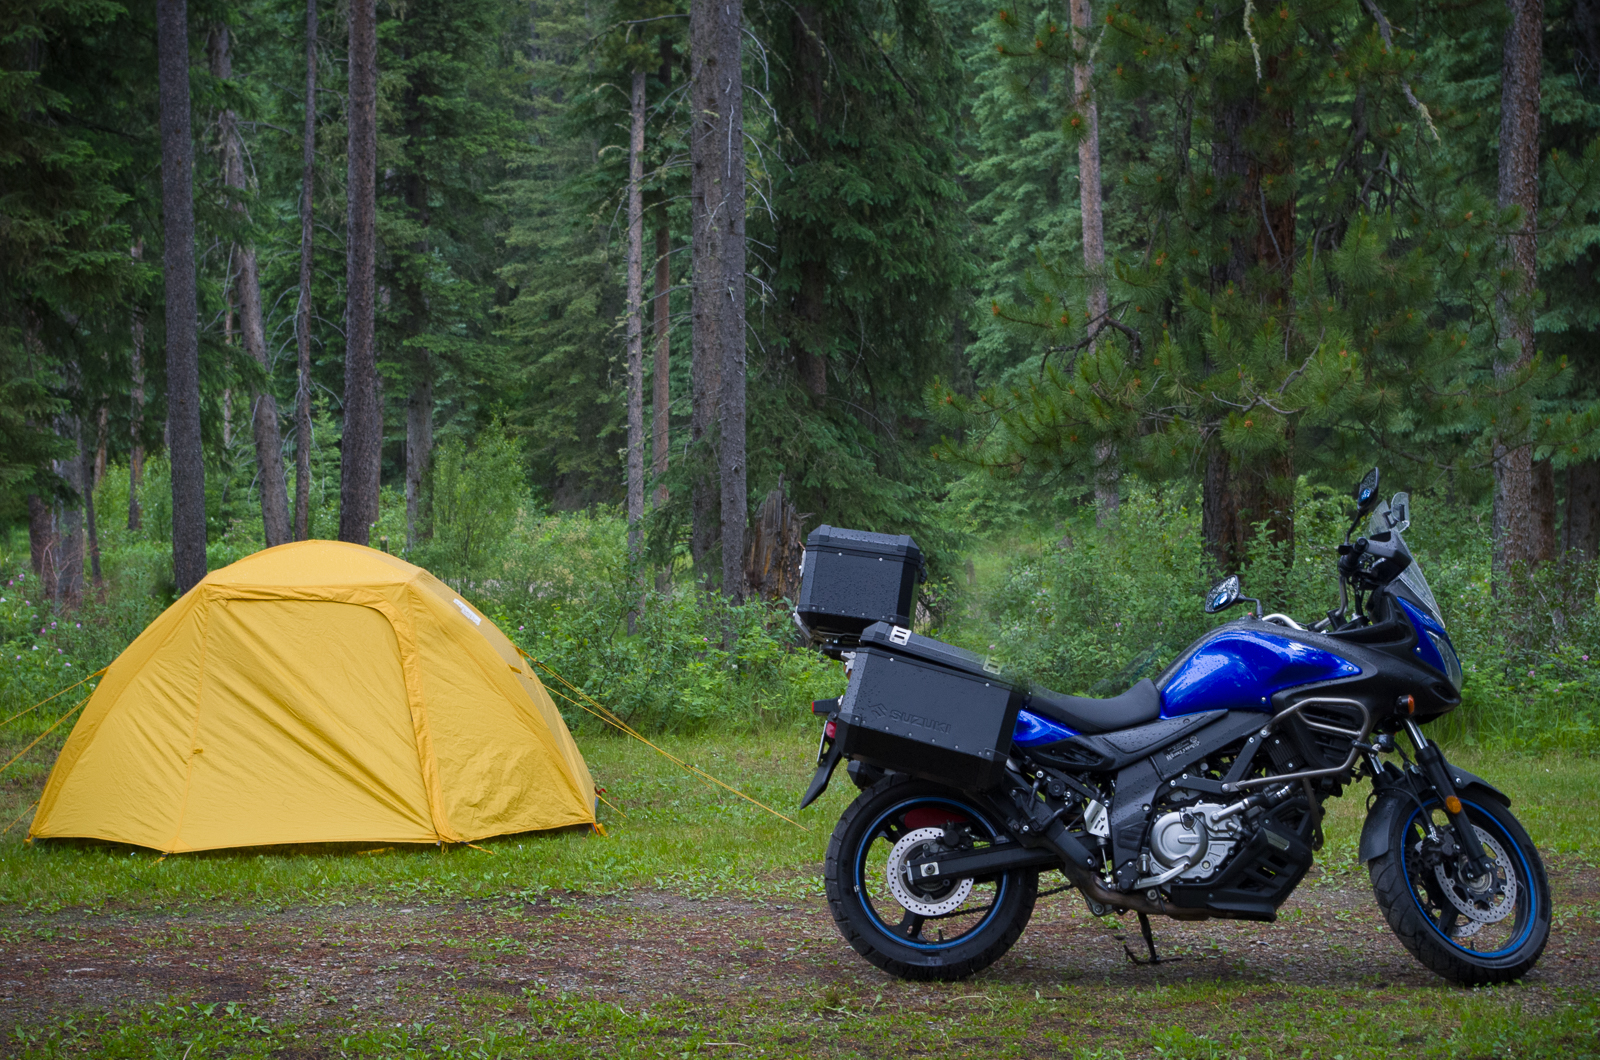 a blue motorcycle parked next to a small yellow tent, surrounded by thick, lush green forest on a wet day.